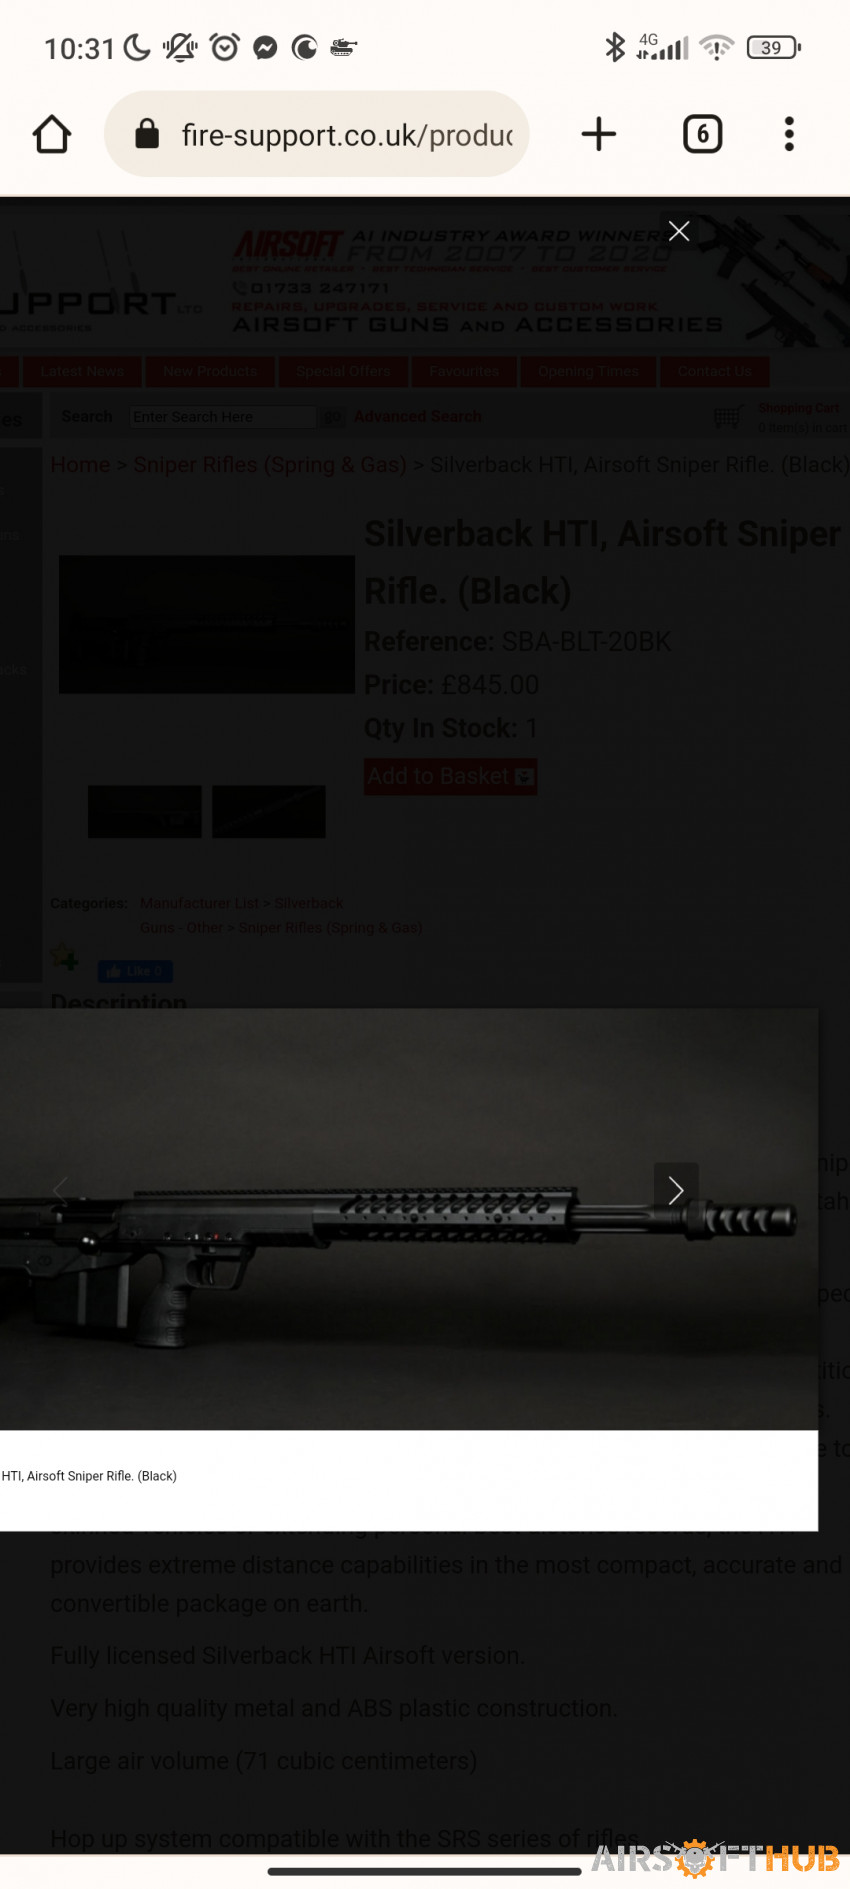 Silverback hti - Used airsoft equipment